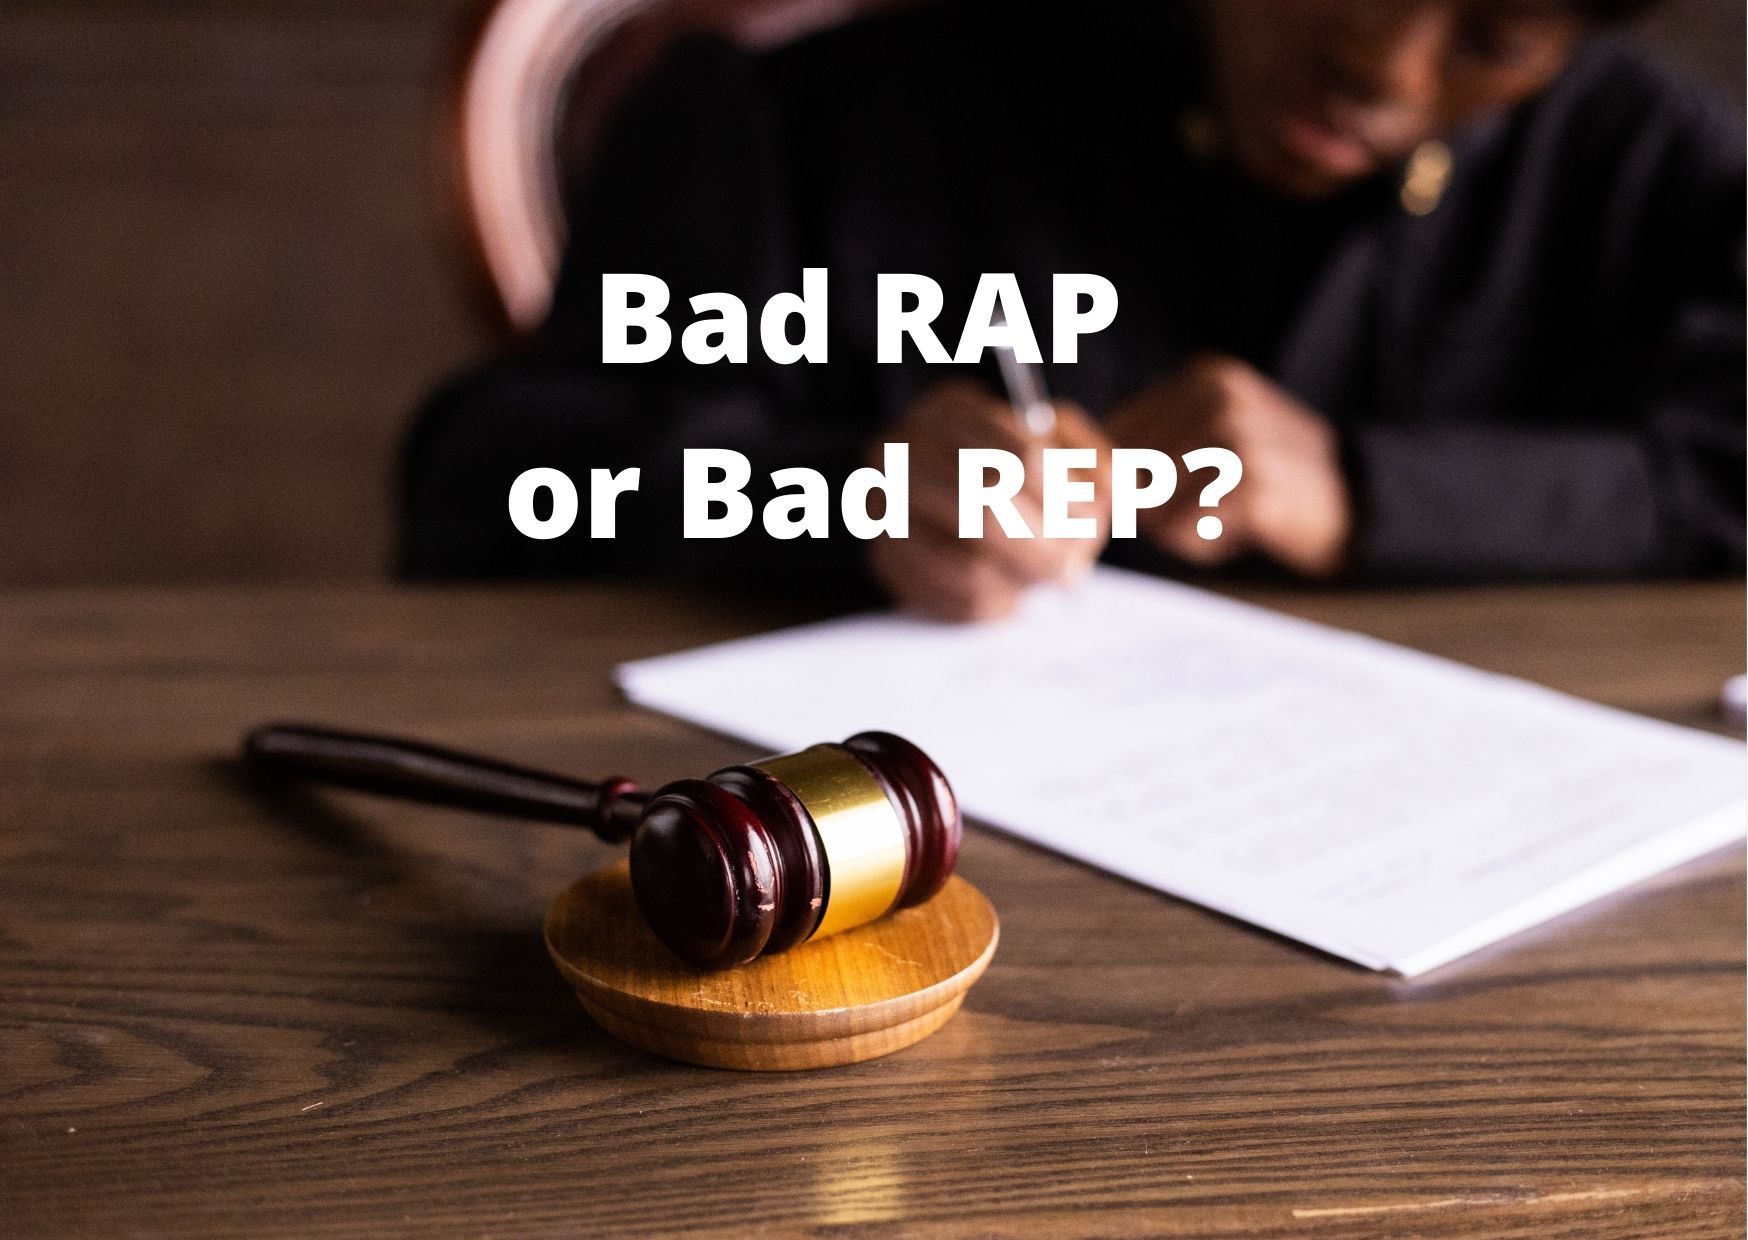 Graphic of a judge's gavel with the words "A Bad Rap or A Bad Rep?"